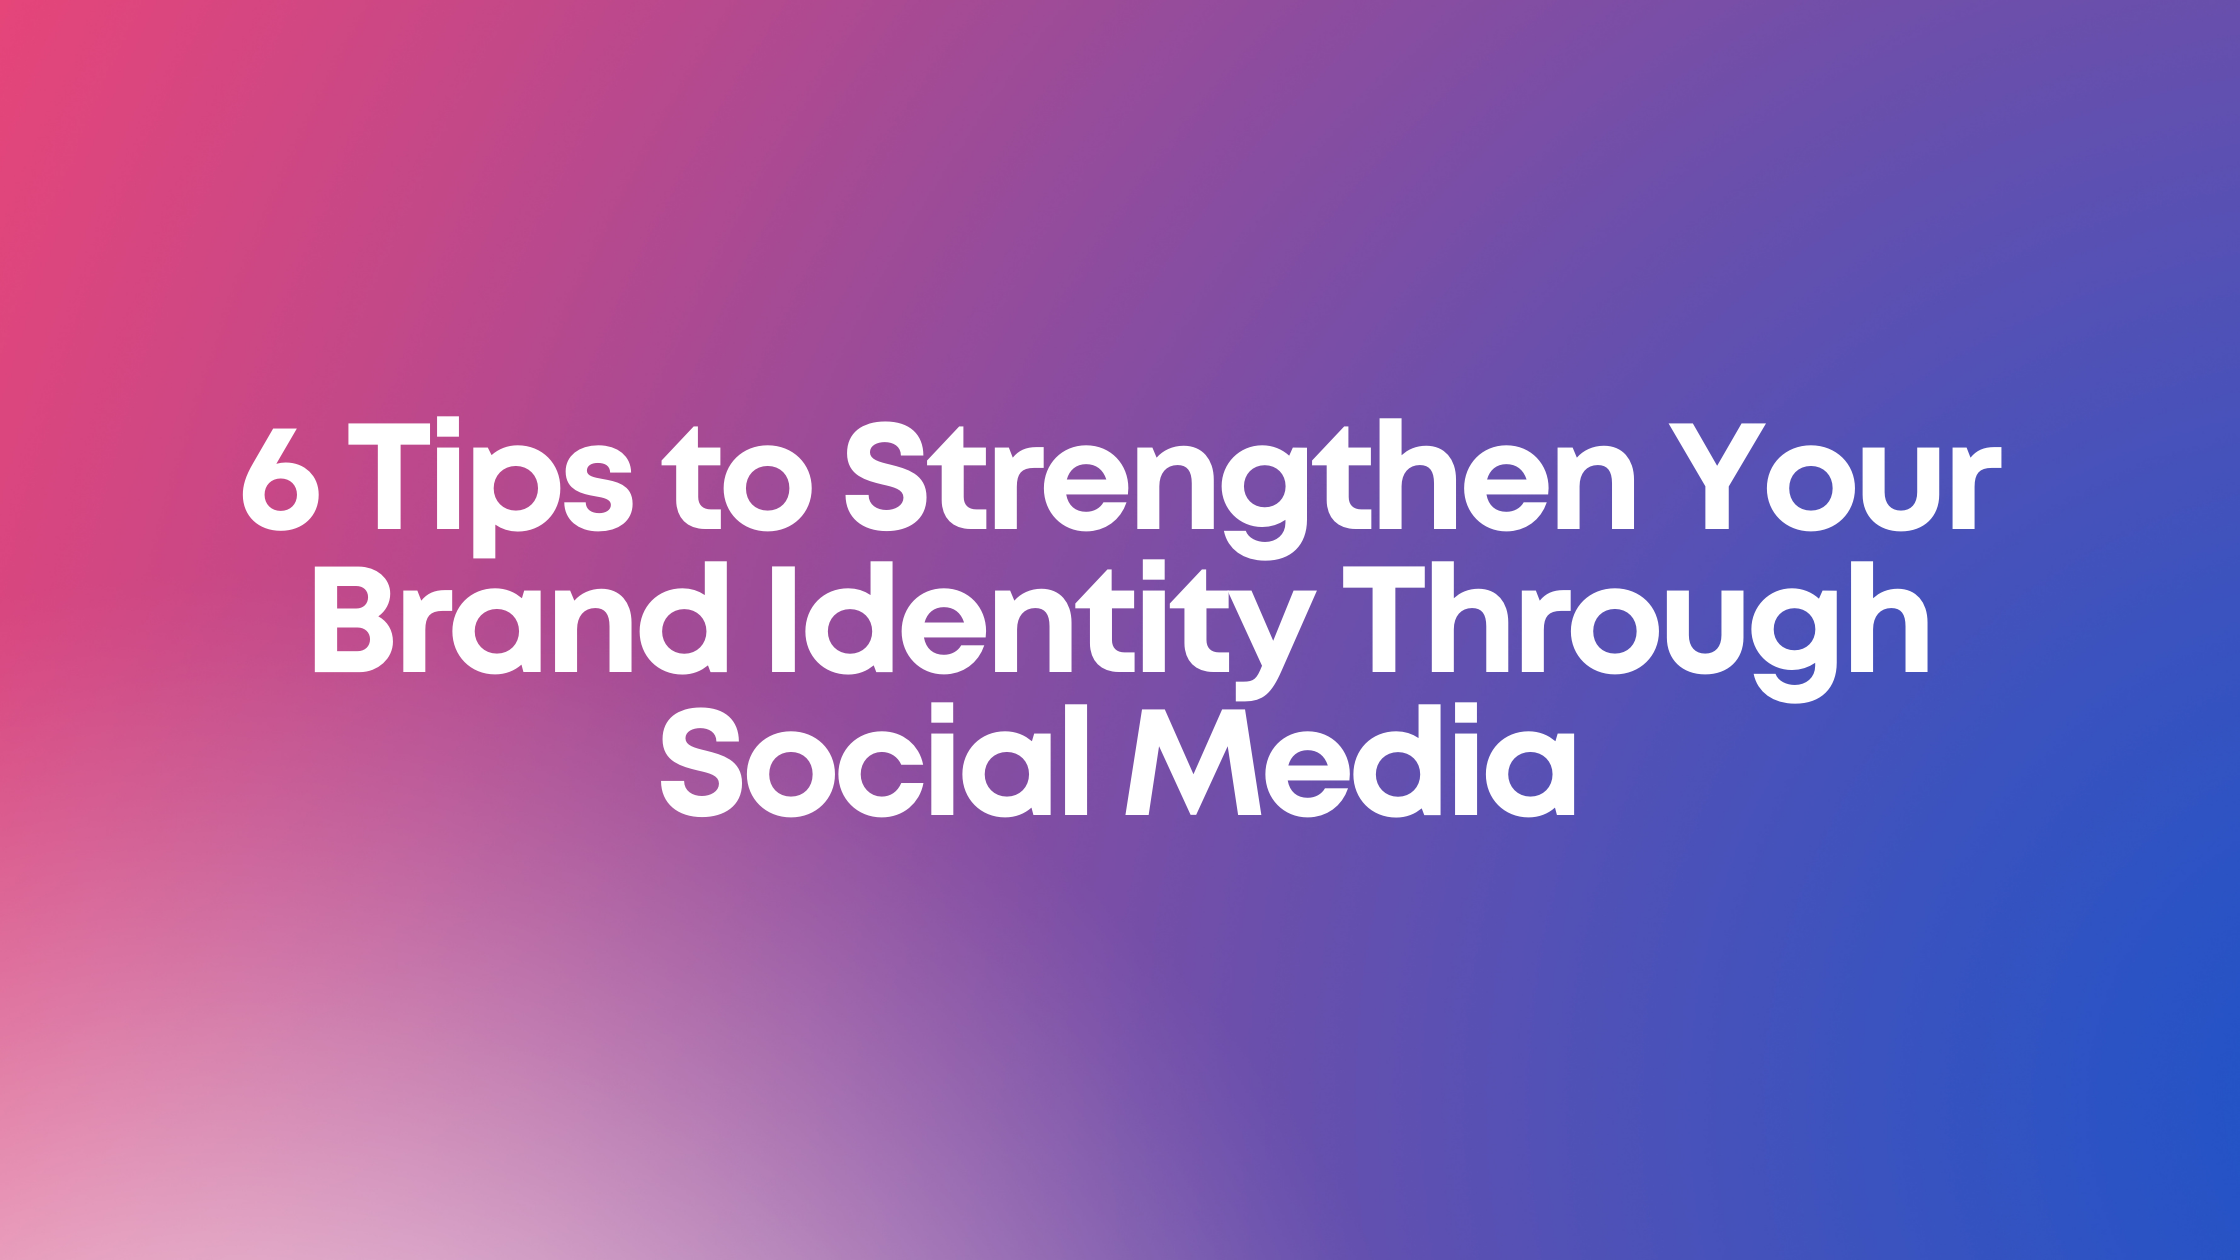 6 Tips to Strengthen Your Brand Identity Through Social Media